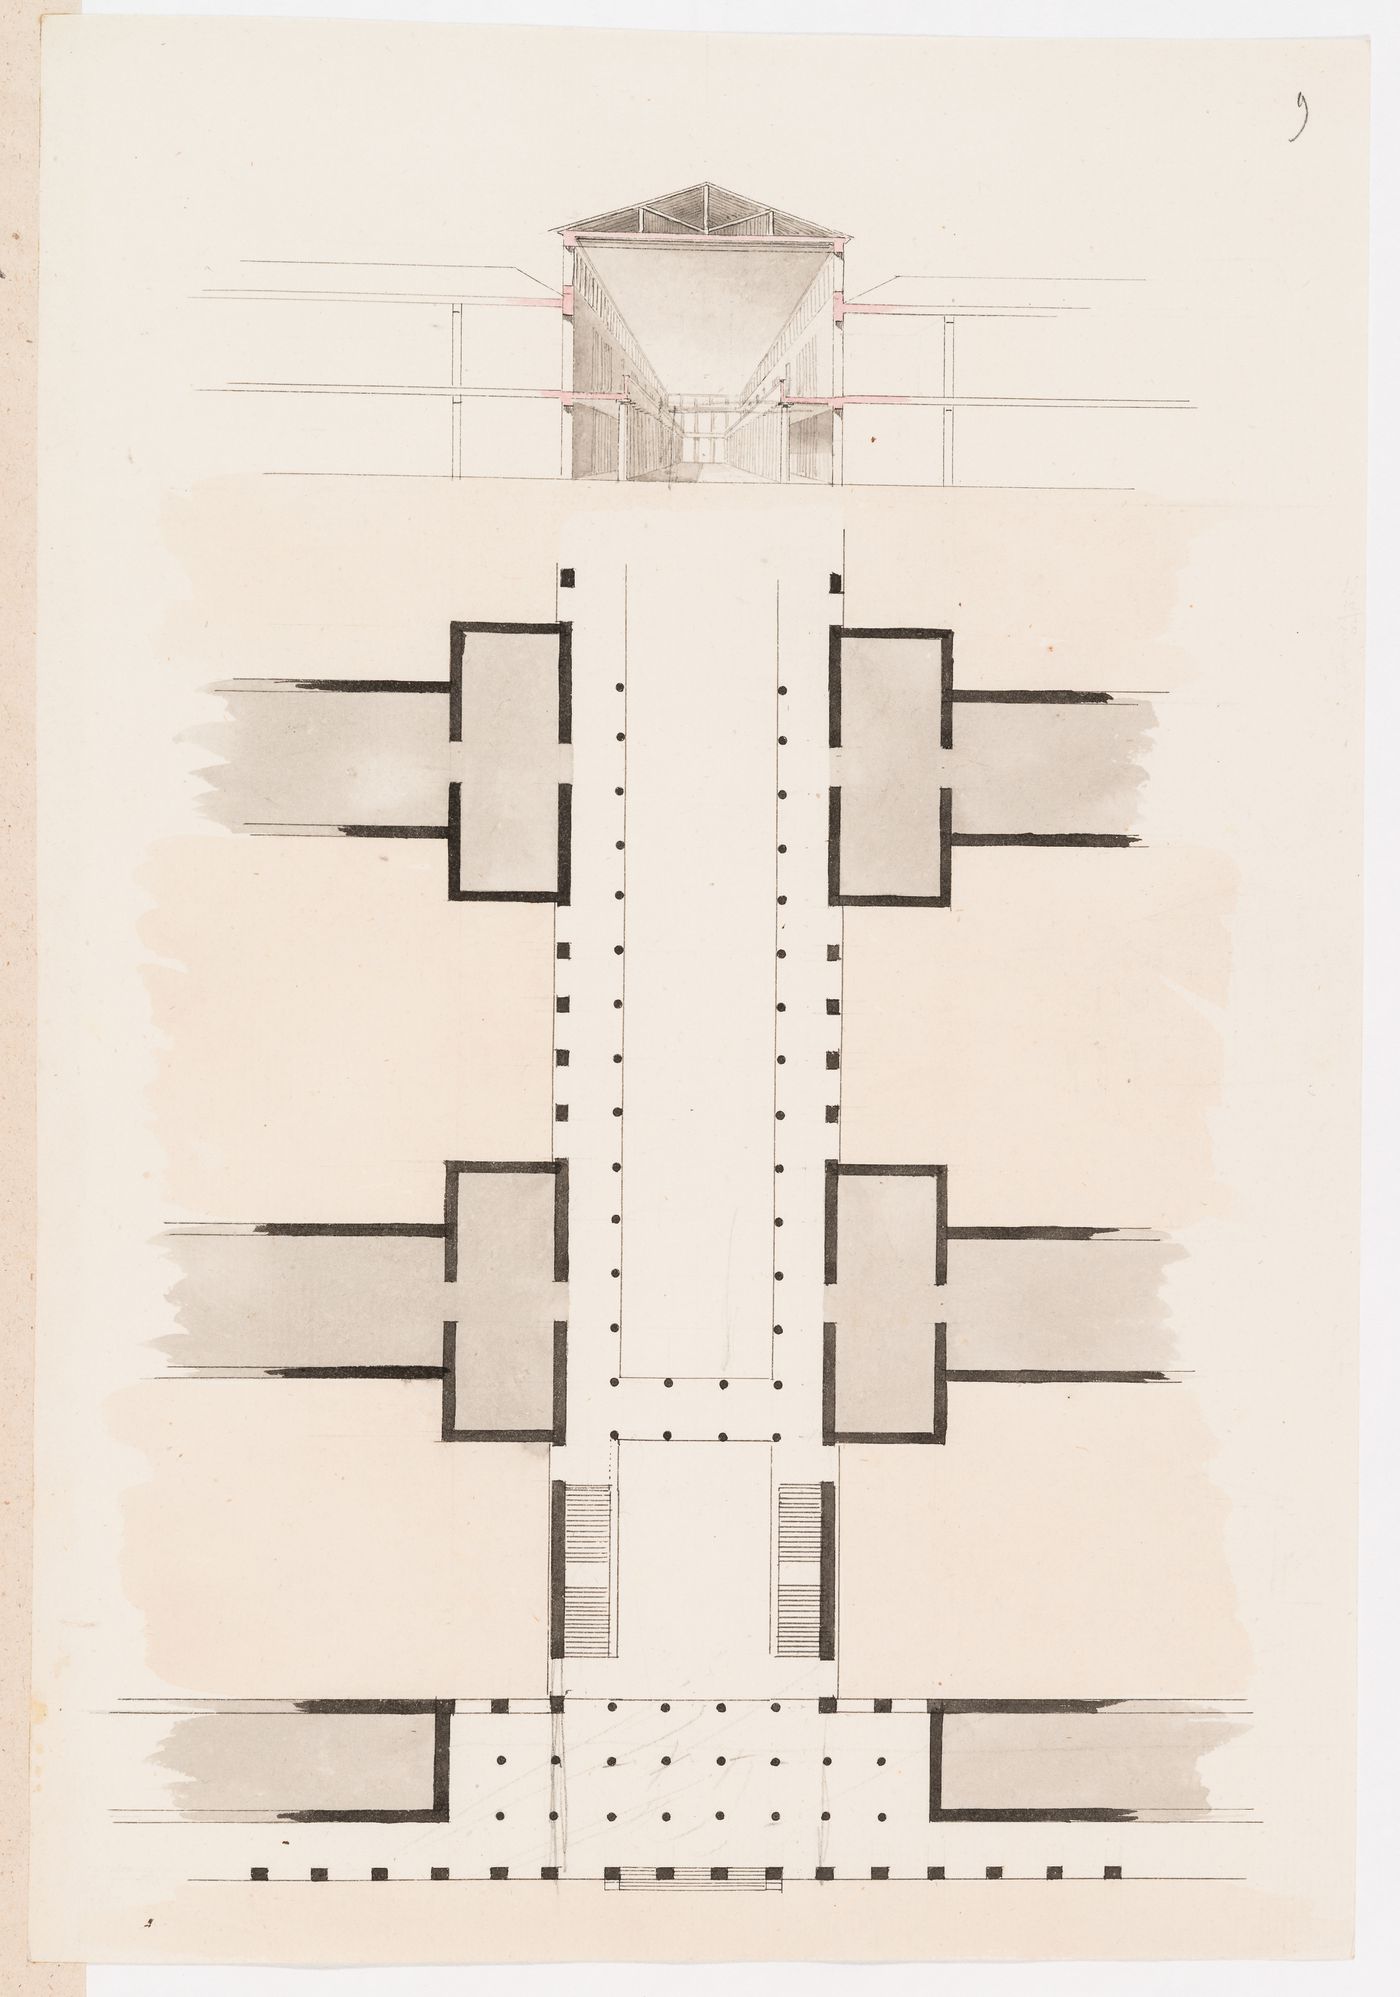 Ideal hospital near the barriére de Monceau, Paris [?]: Partial plan and sectional perspective; verso: Sketches for a hospital